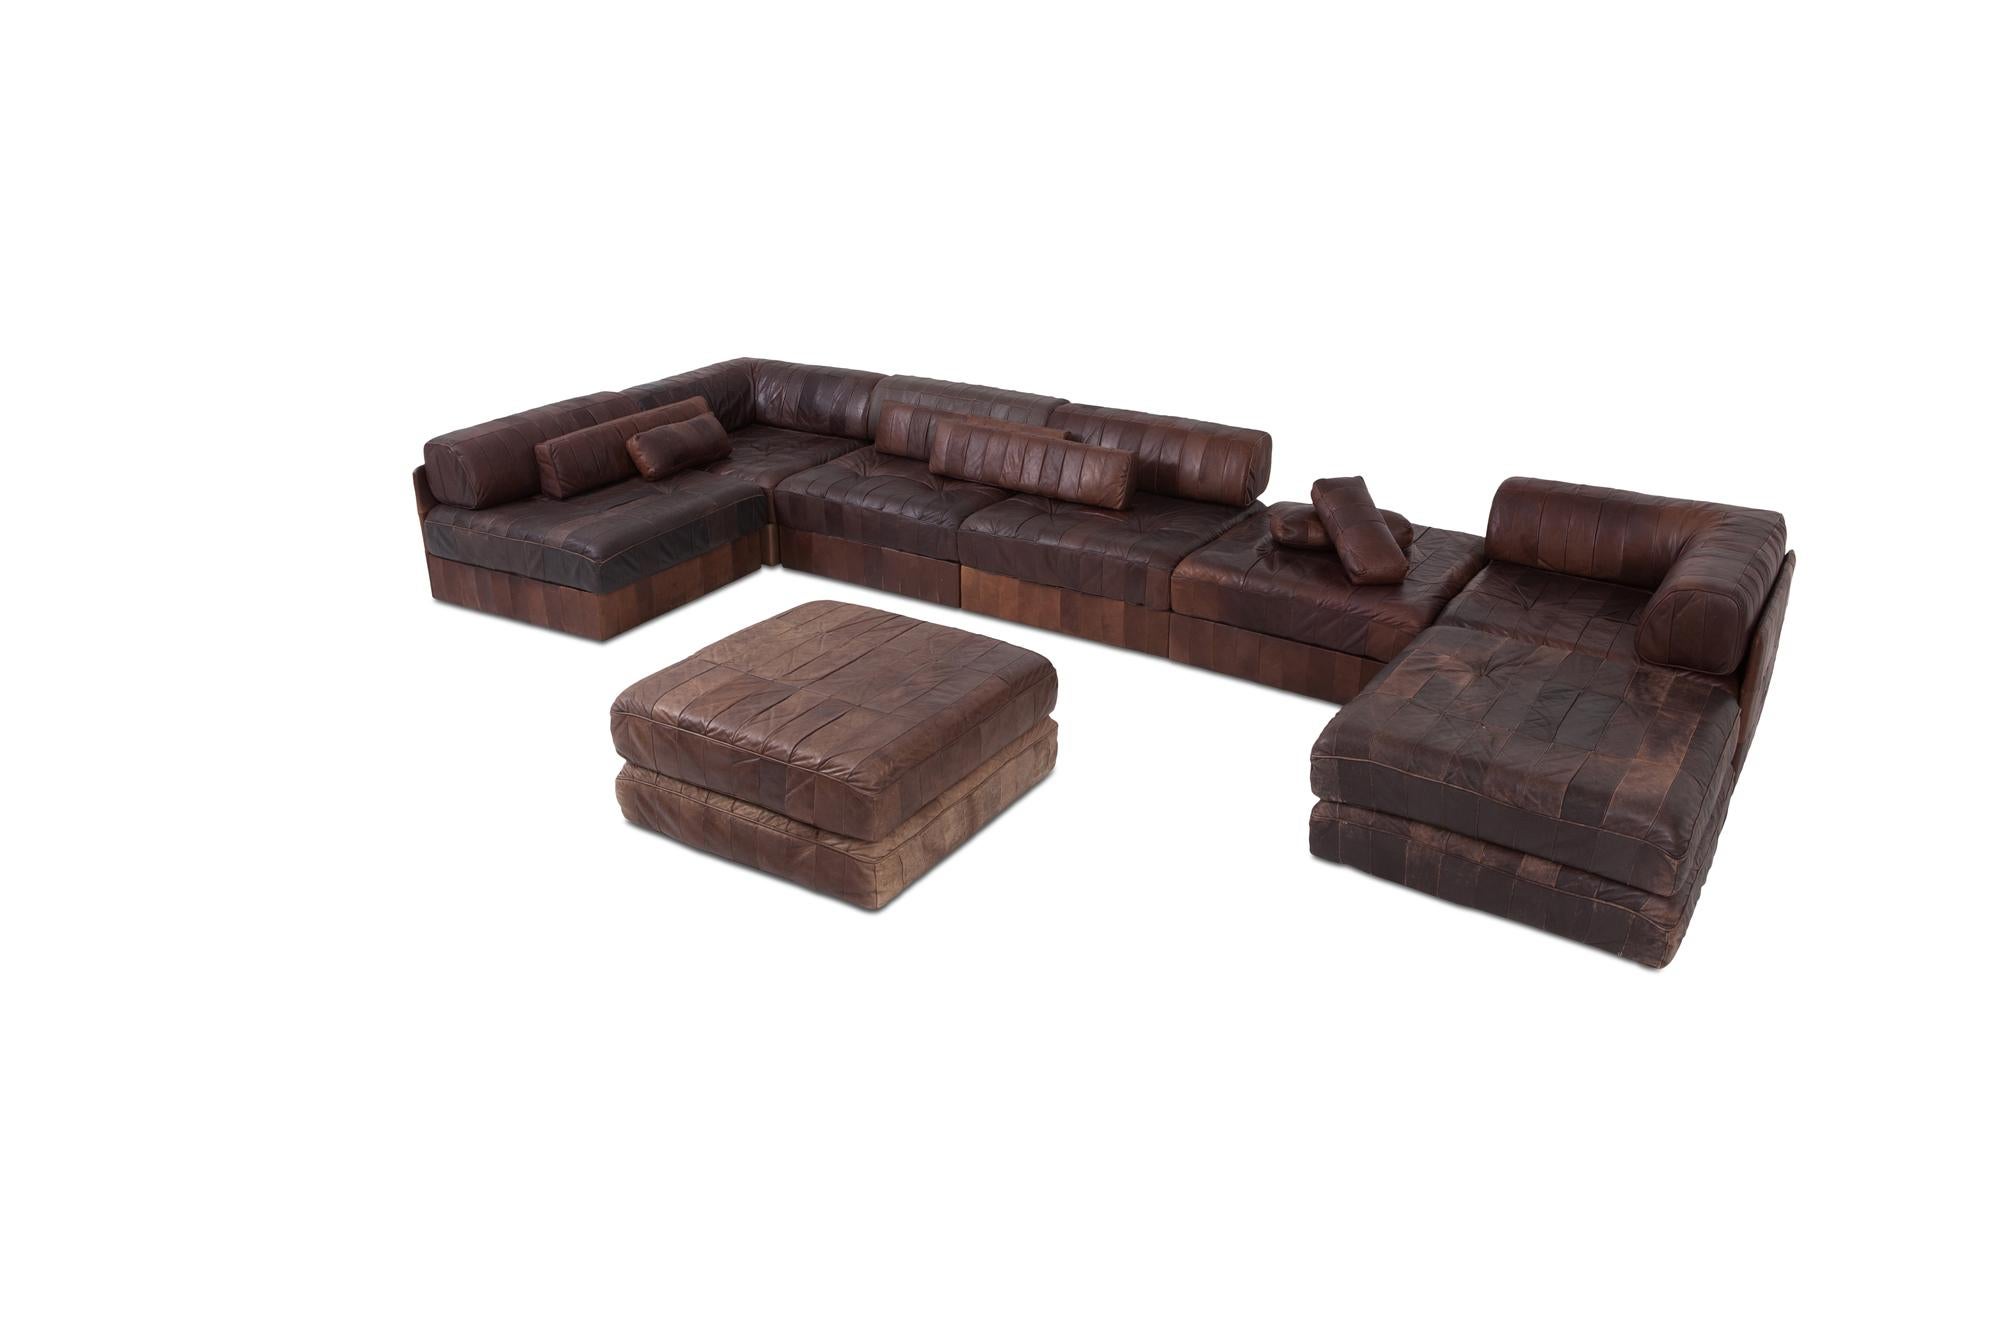 DS 88 sectional sofa in patchwork brown-cognac leather. 

Hand built in the 1970s to incredibly high standards by De Sede craftsman in Switzerland. Made of five sections, each with a base leather patchwork cushion and a back cushion made from the